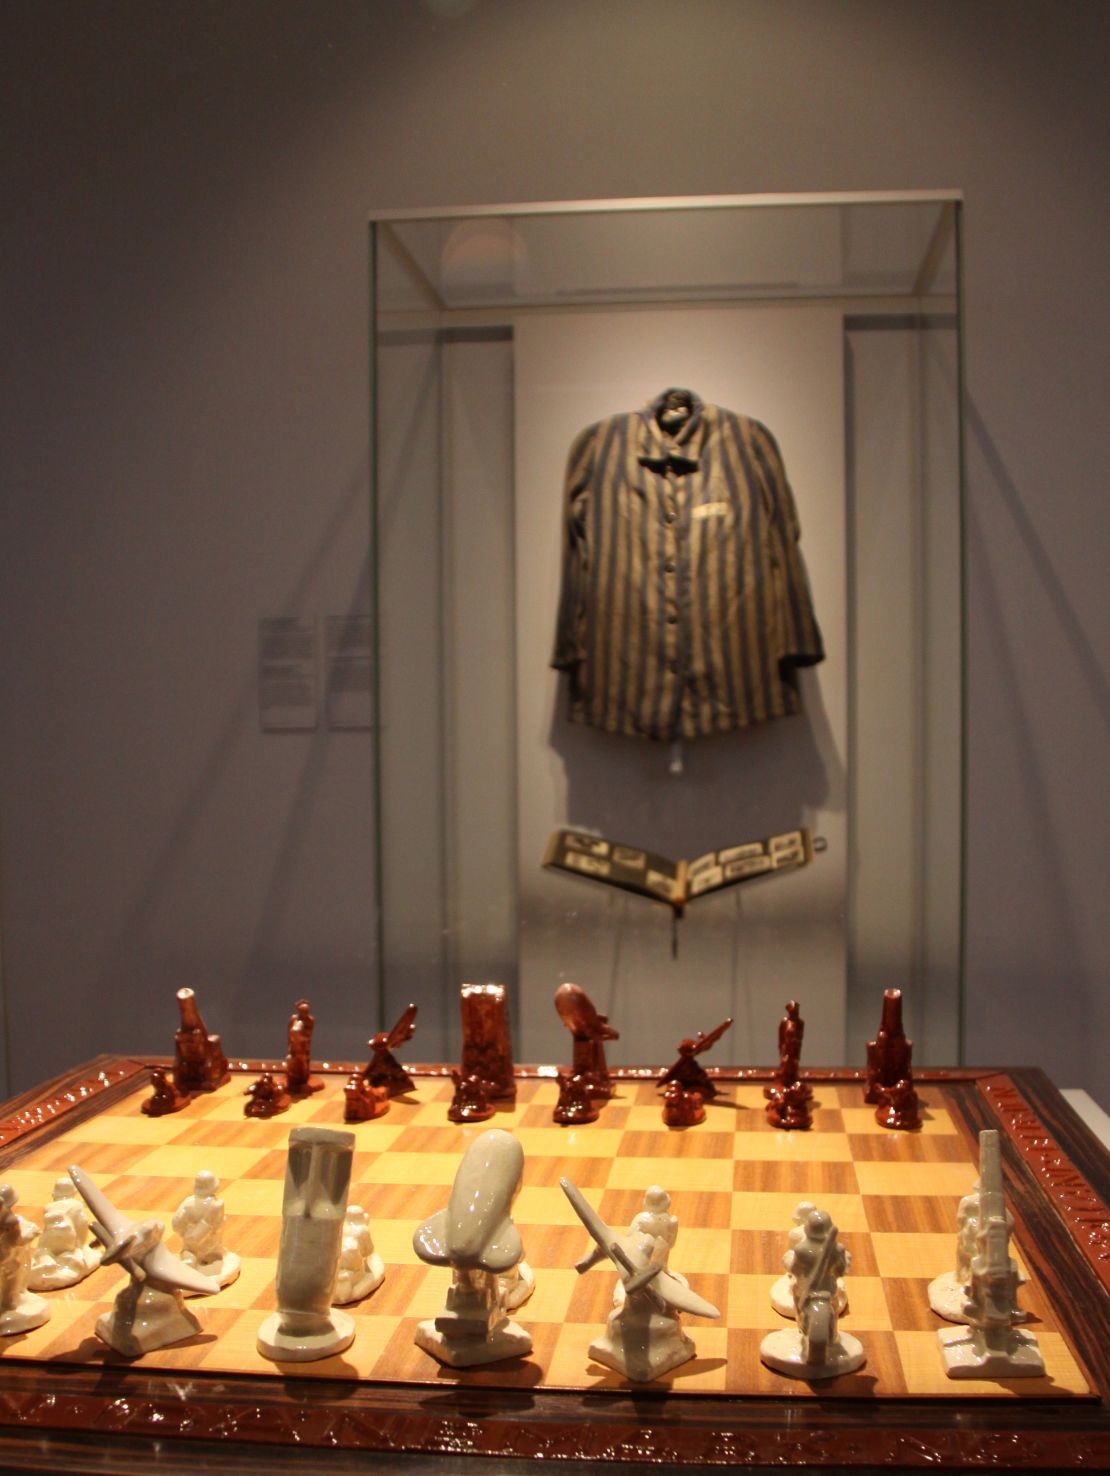 This grisly chess set was a gift from leading Nazi Heinrich Himmler to Anton Mussert, a senior figure in the Dutch National Socialist party.